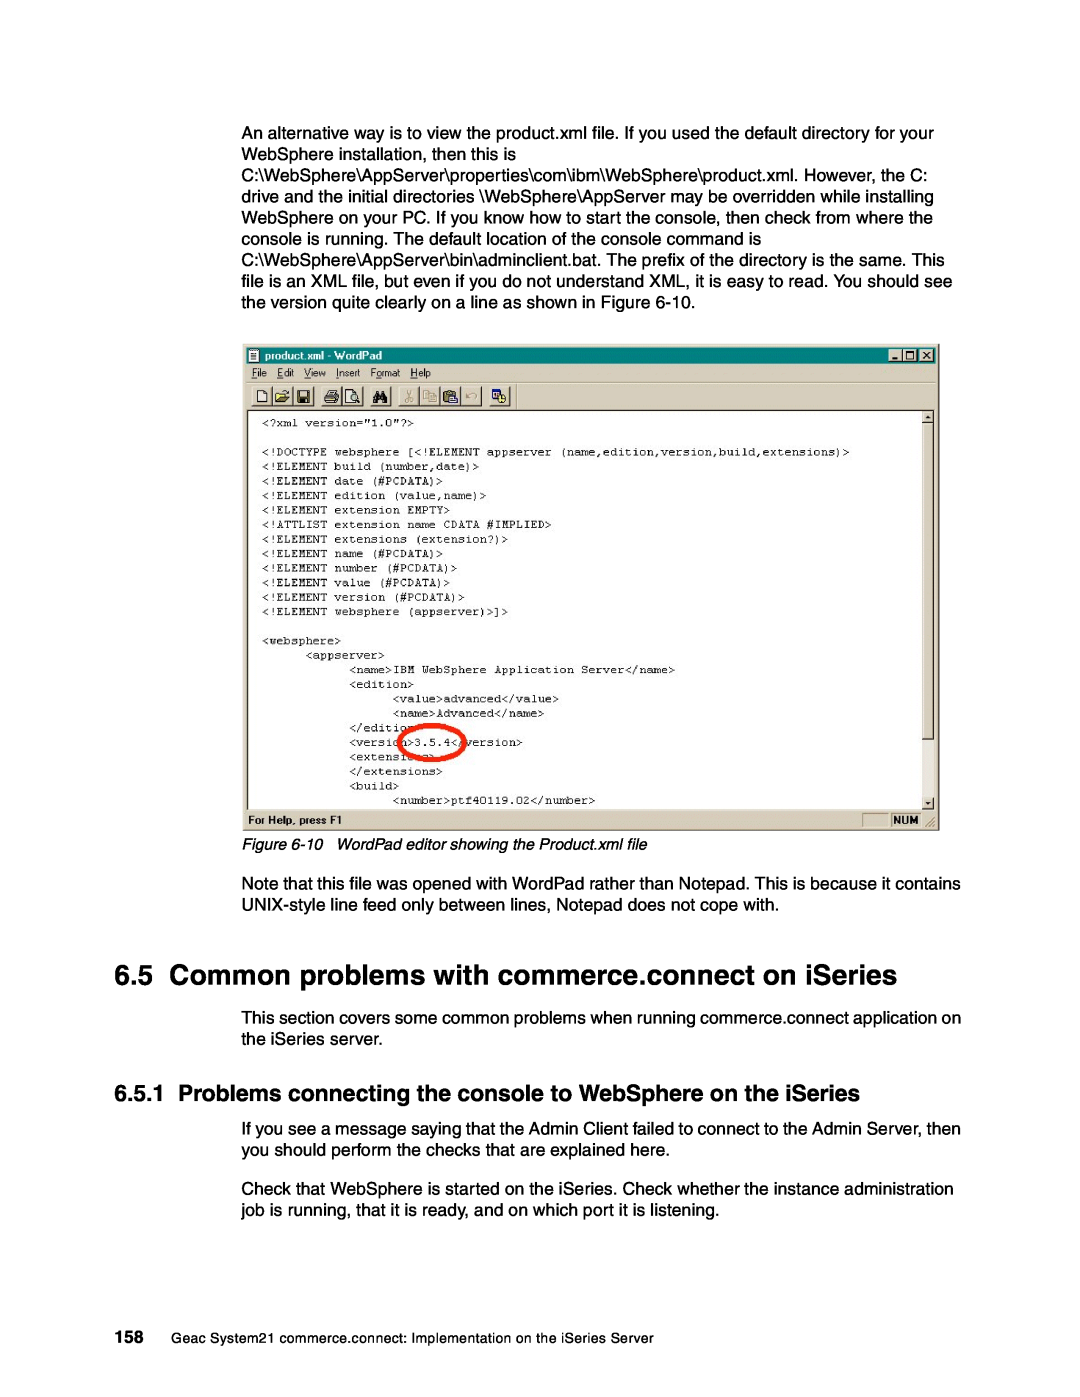 IBM SG24-6526-00 manual Common problems with commerce.connect on iSeries 